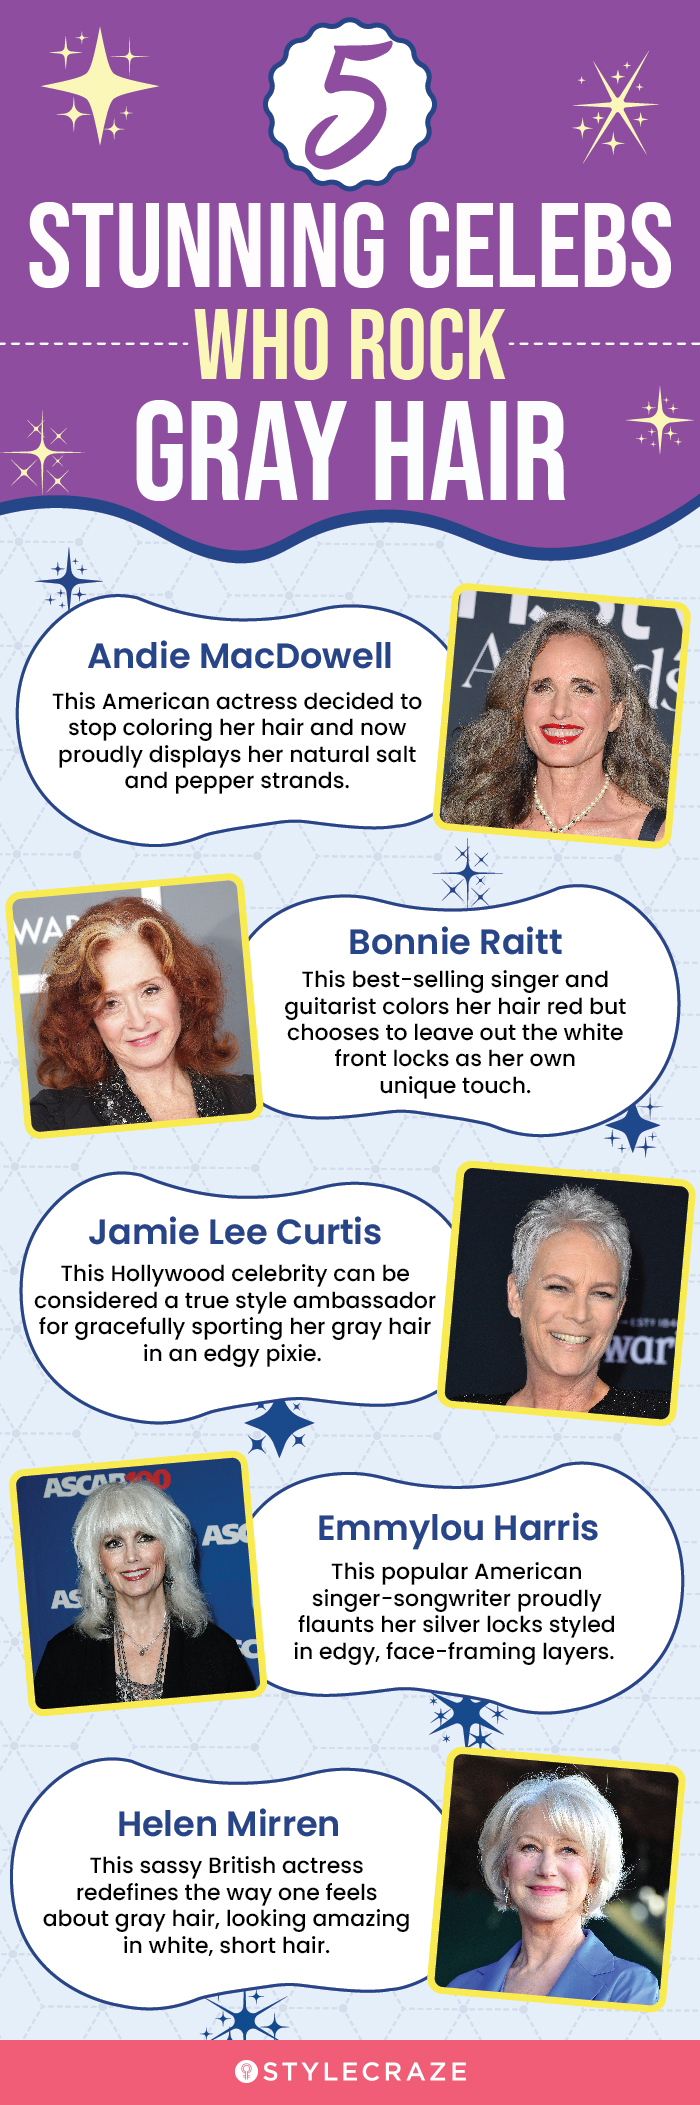 5 stunning celebs who rock gray hair (infographic)